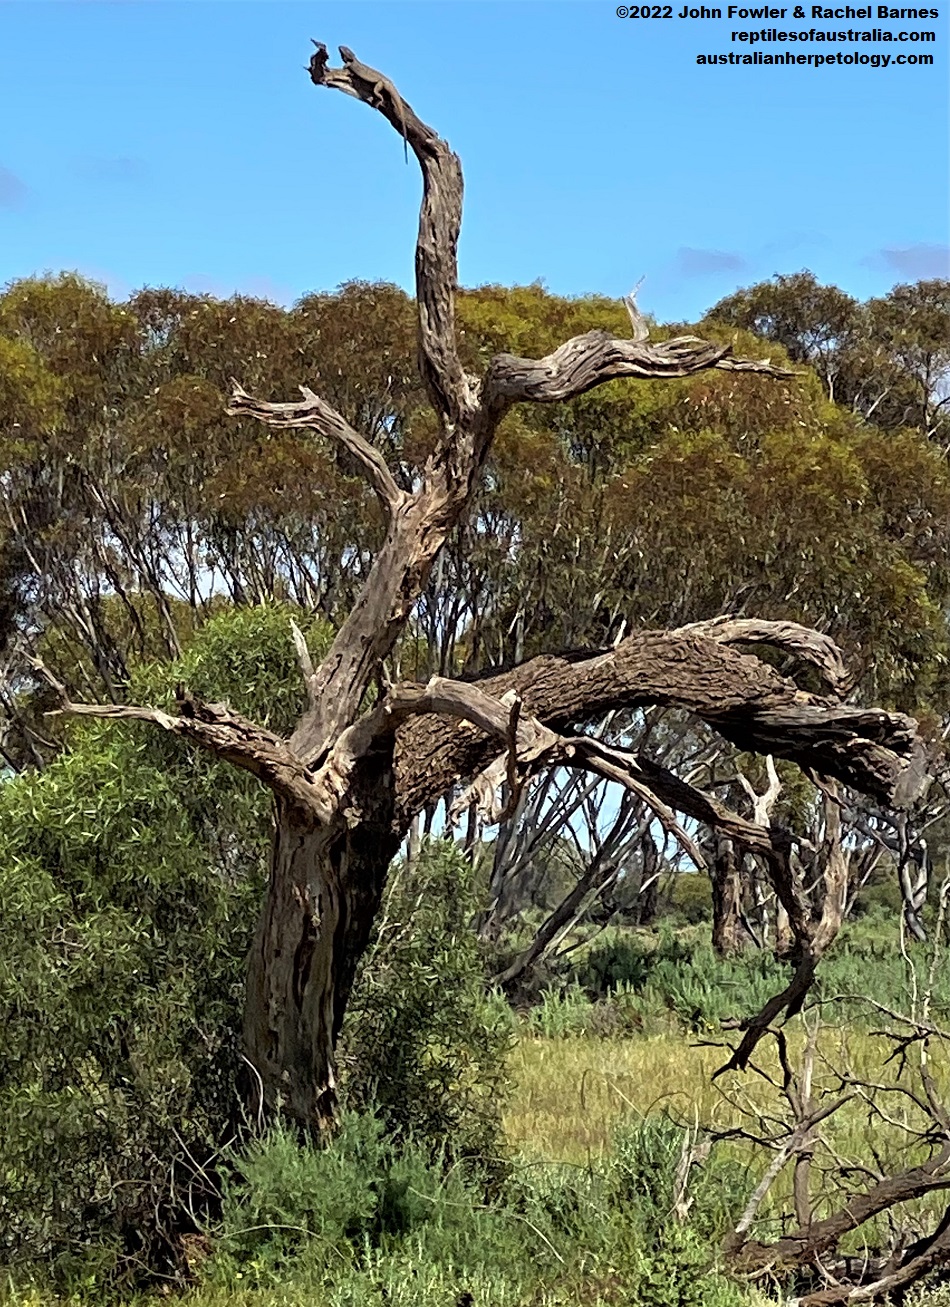 I spotted this Inland Bearded Dragon (Pogona vitticeps) perched at the top of this tree from a long way from a track north of Waikerie, South Australia.